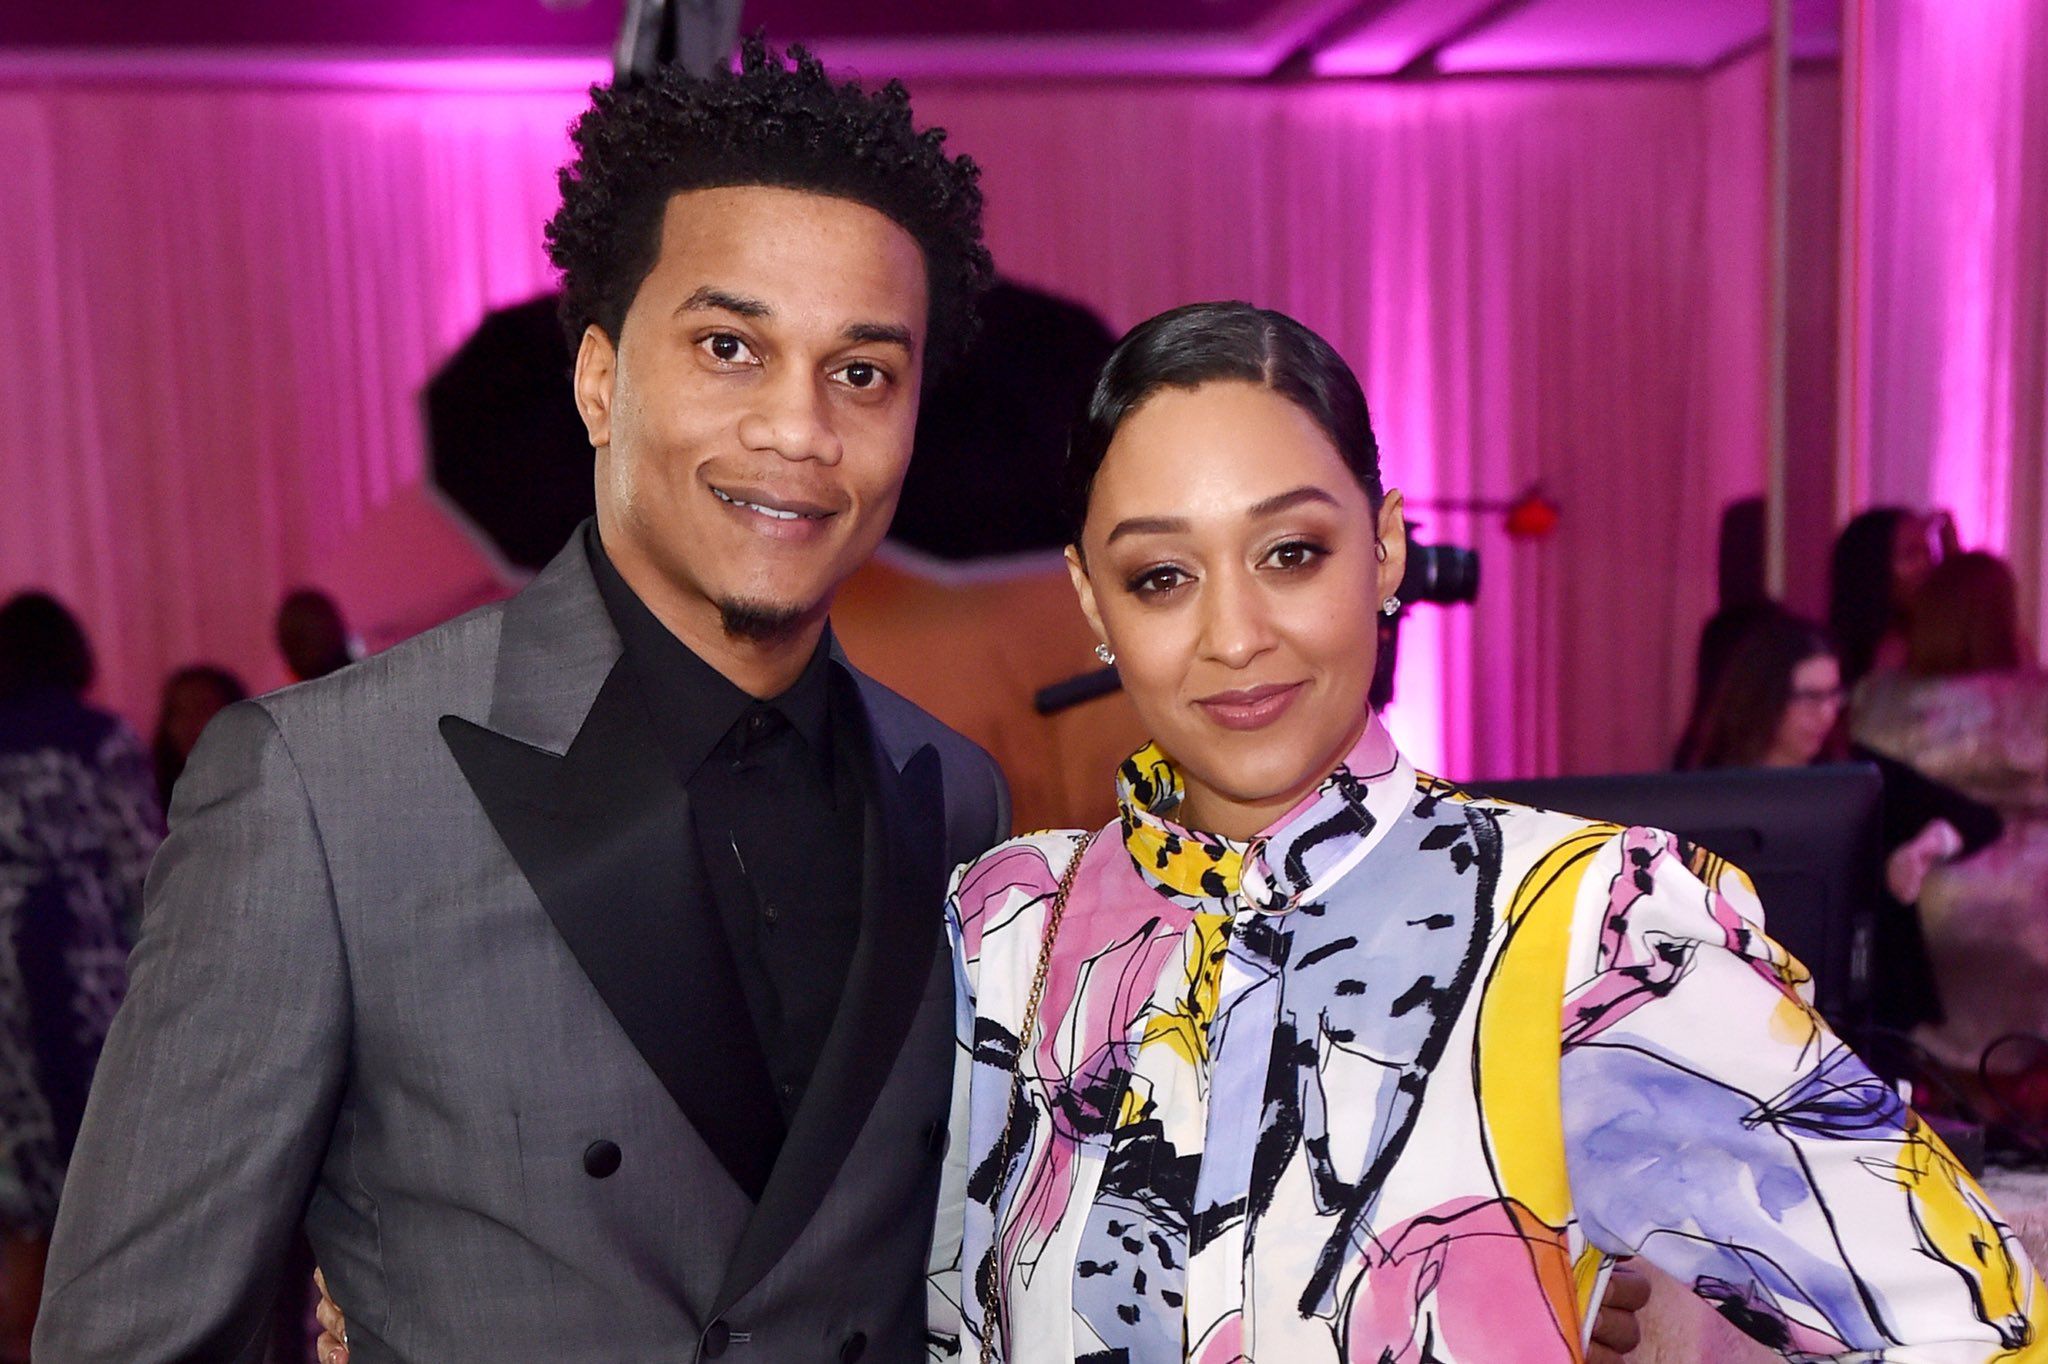 Tia Mowry files for divorce from husband of 14 years Cory Hardict